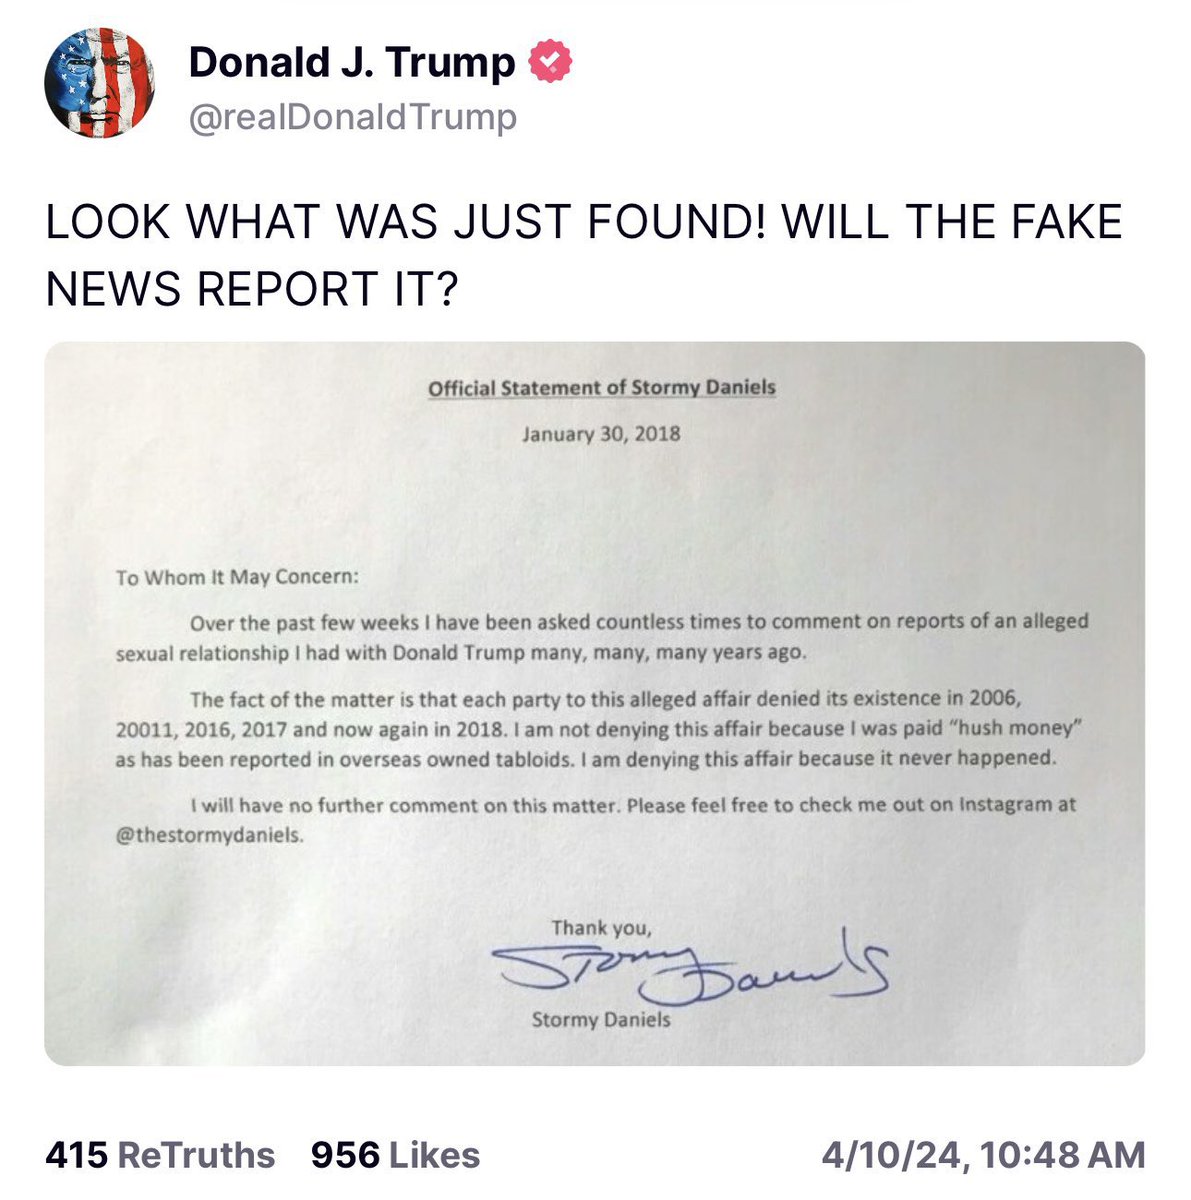 Trump knows the fake news including Fox News isn't reporting on this folks, so you know exactly what to do (RT) for Trump When Stormy Daniels said it never happened... I believe her, anything else is a lie